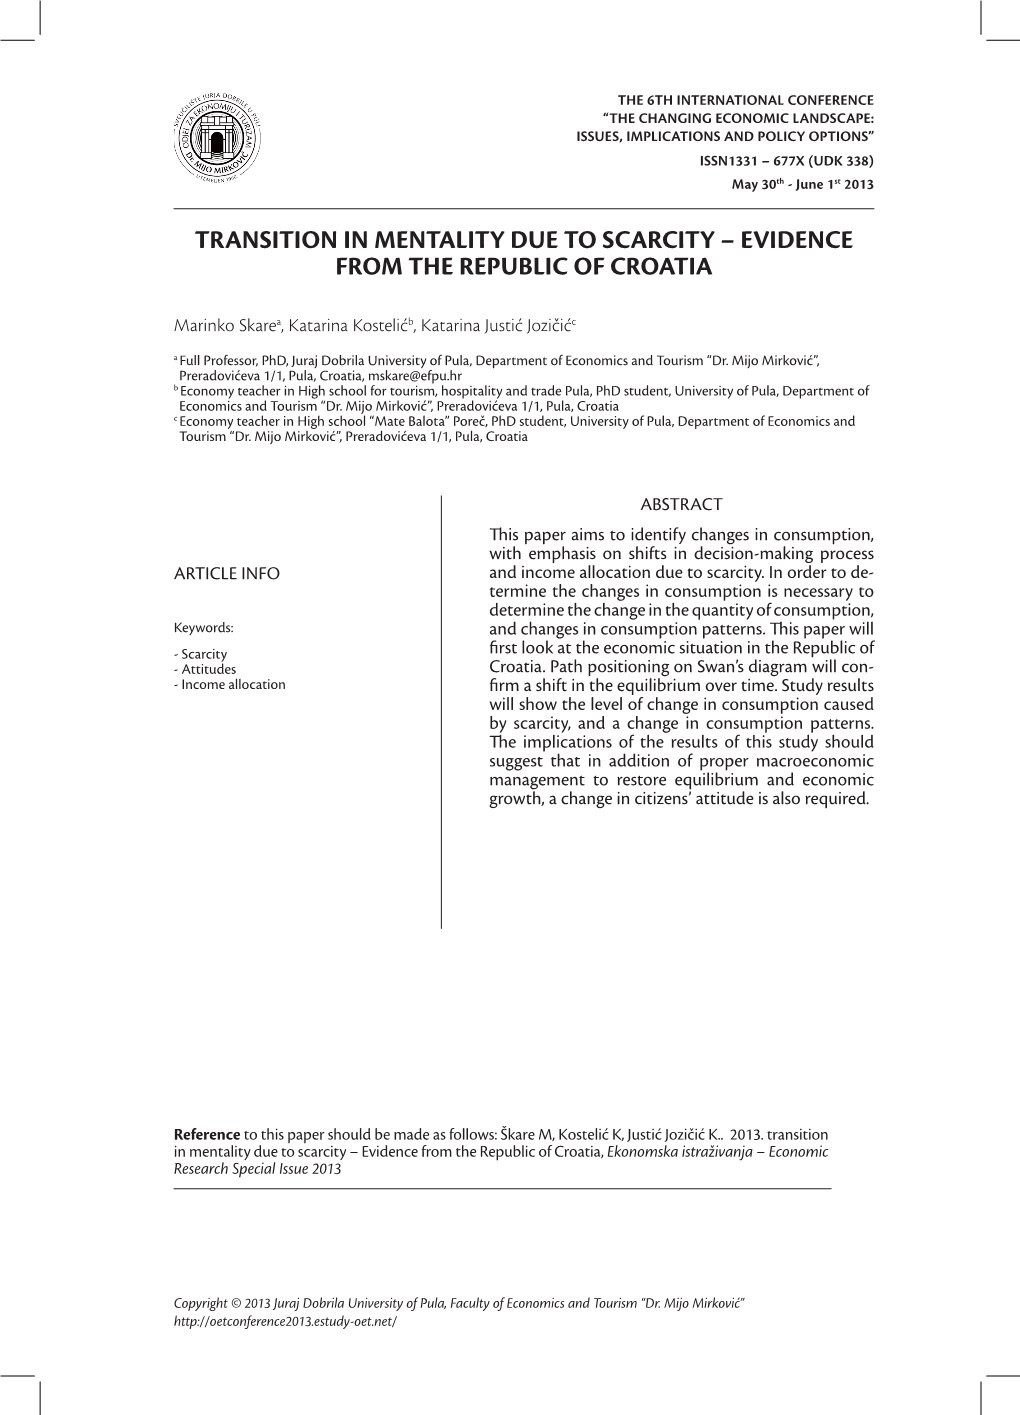 Transition in Mentality Due to Scarcity – Evidence from the Republic of Croatia